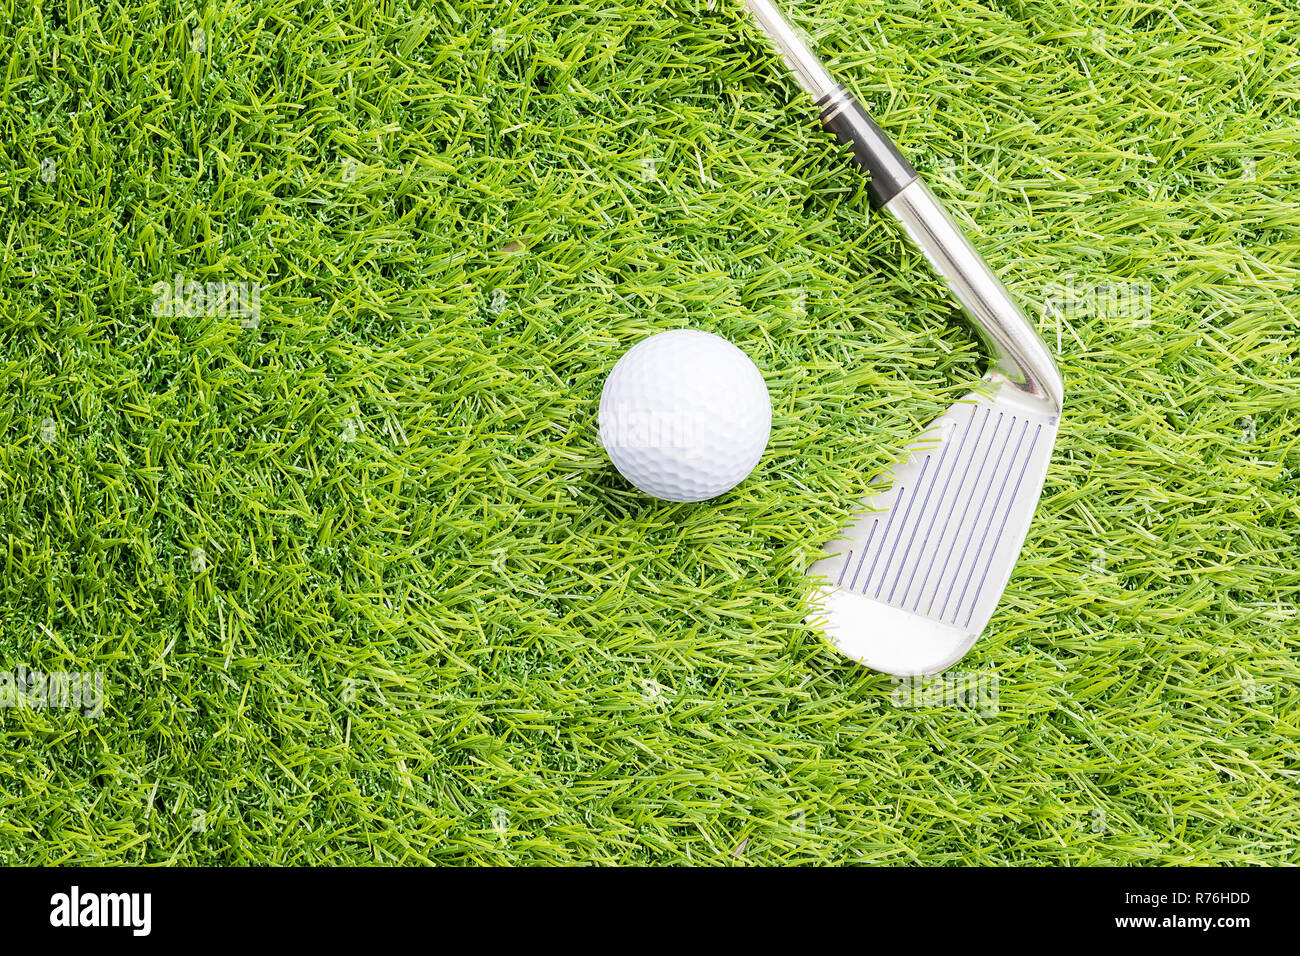 Sport object related to golf equipment Stock Photo